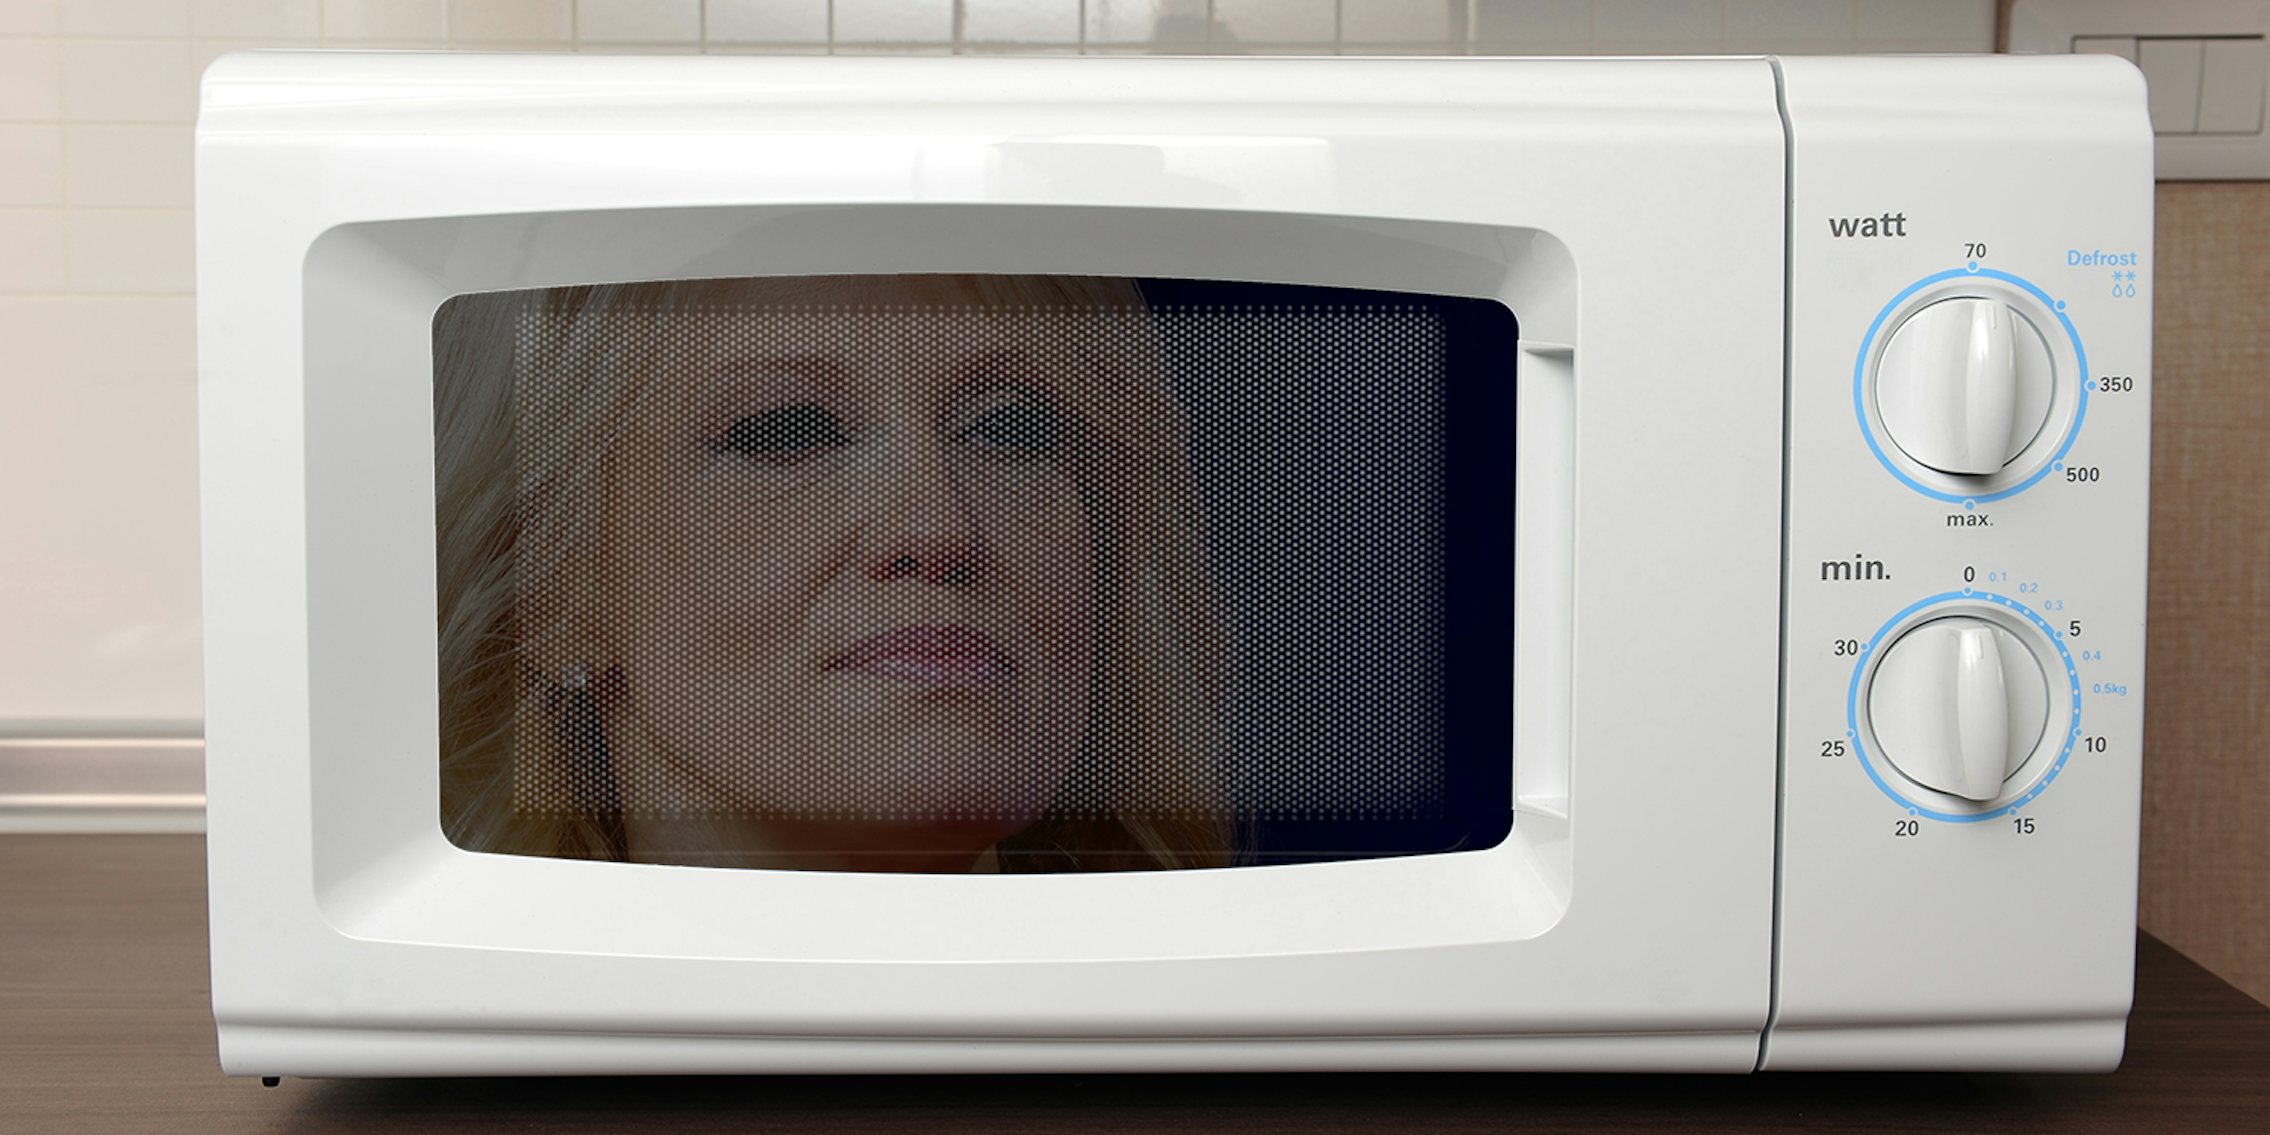 Kellyanne Conway microwave oven